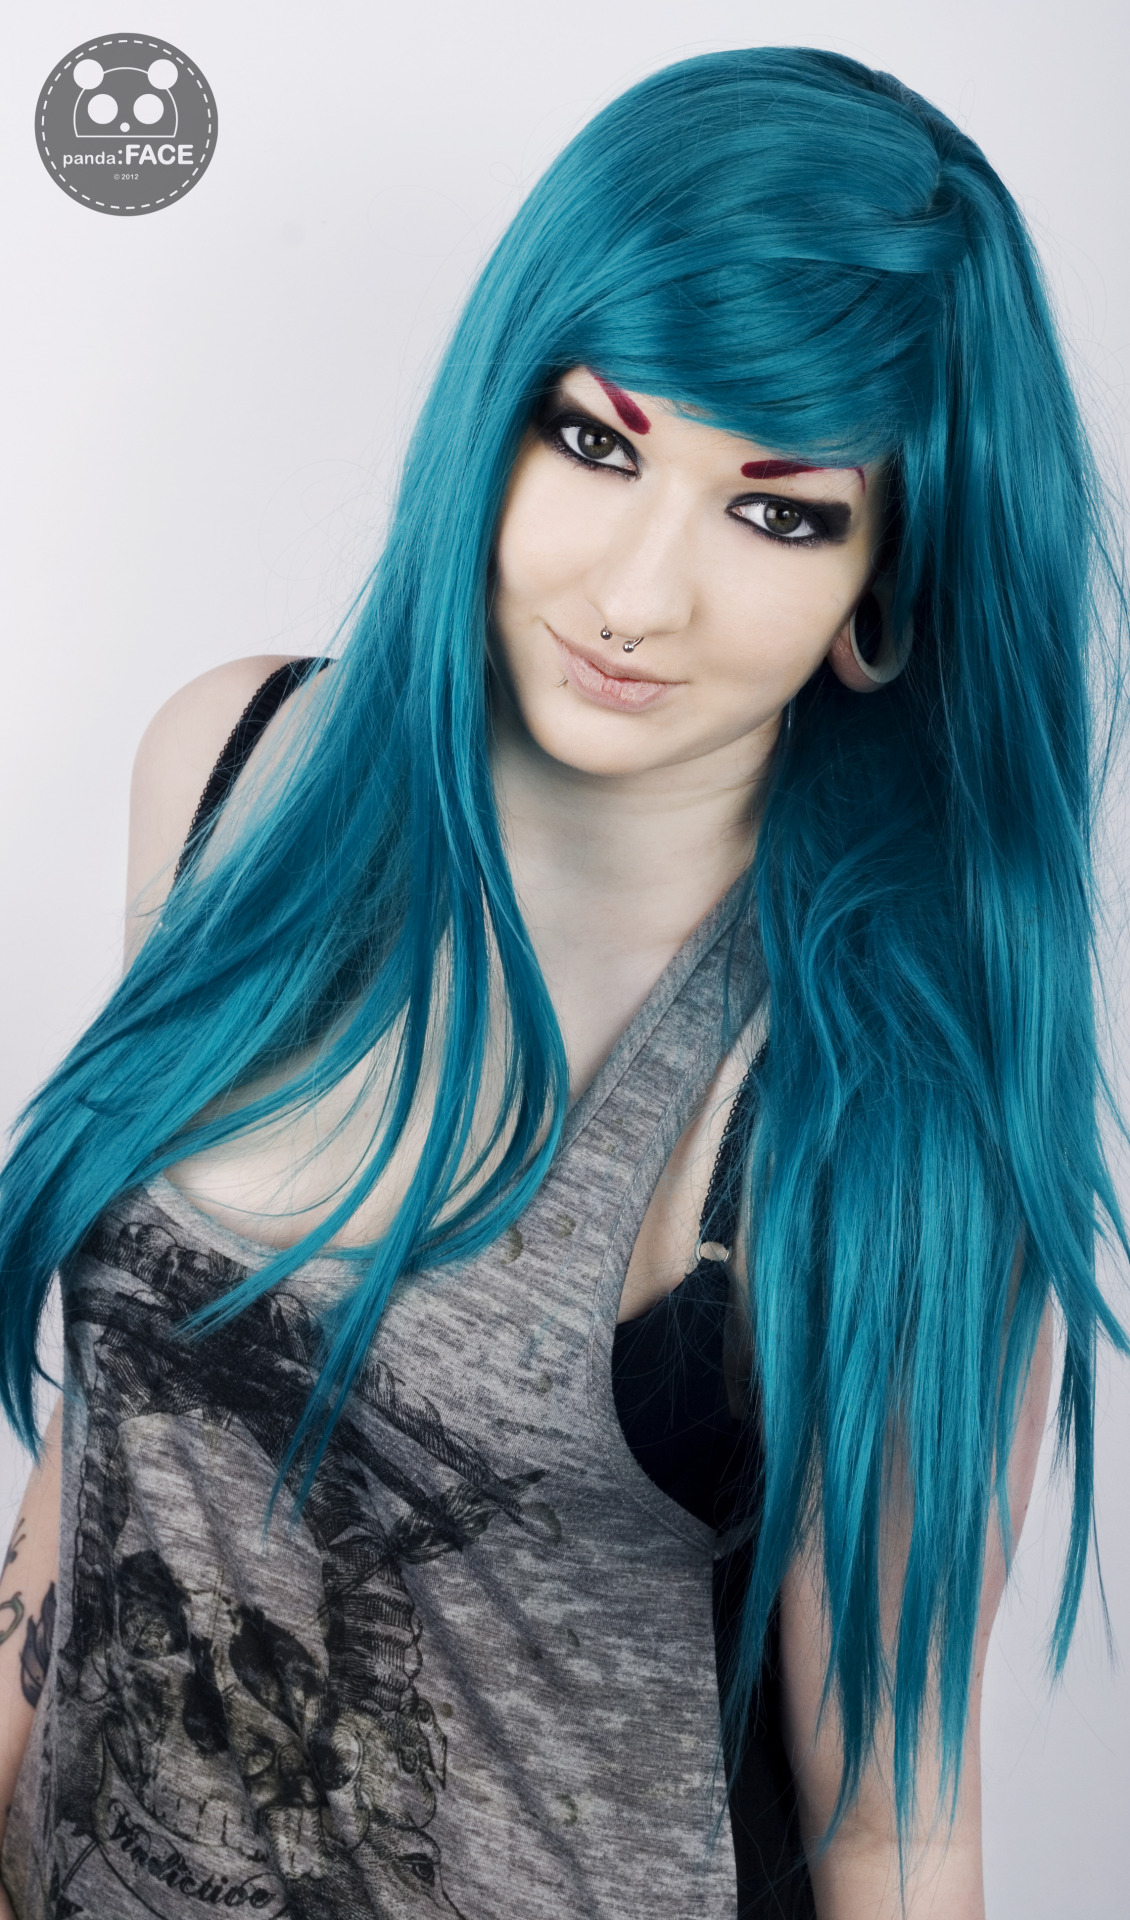 panda-face-mew:  One from today Model: Hollie Wood - Alt Model Photographer: Panda